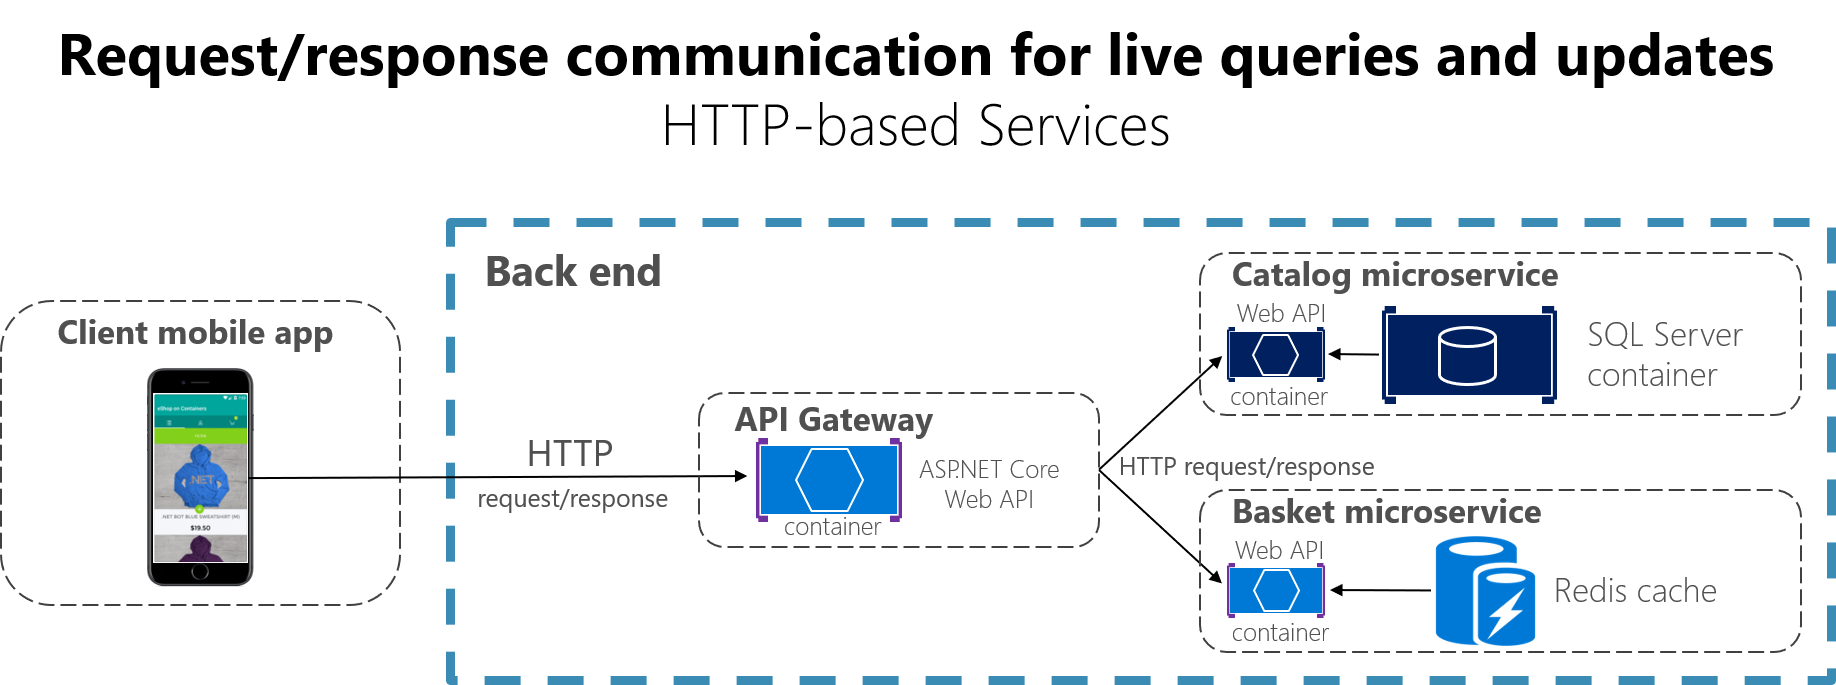 Diagram showing request/response comms for live queries and updates.